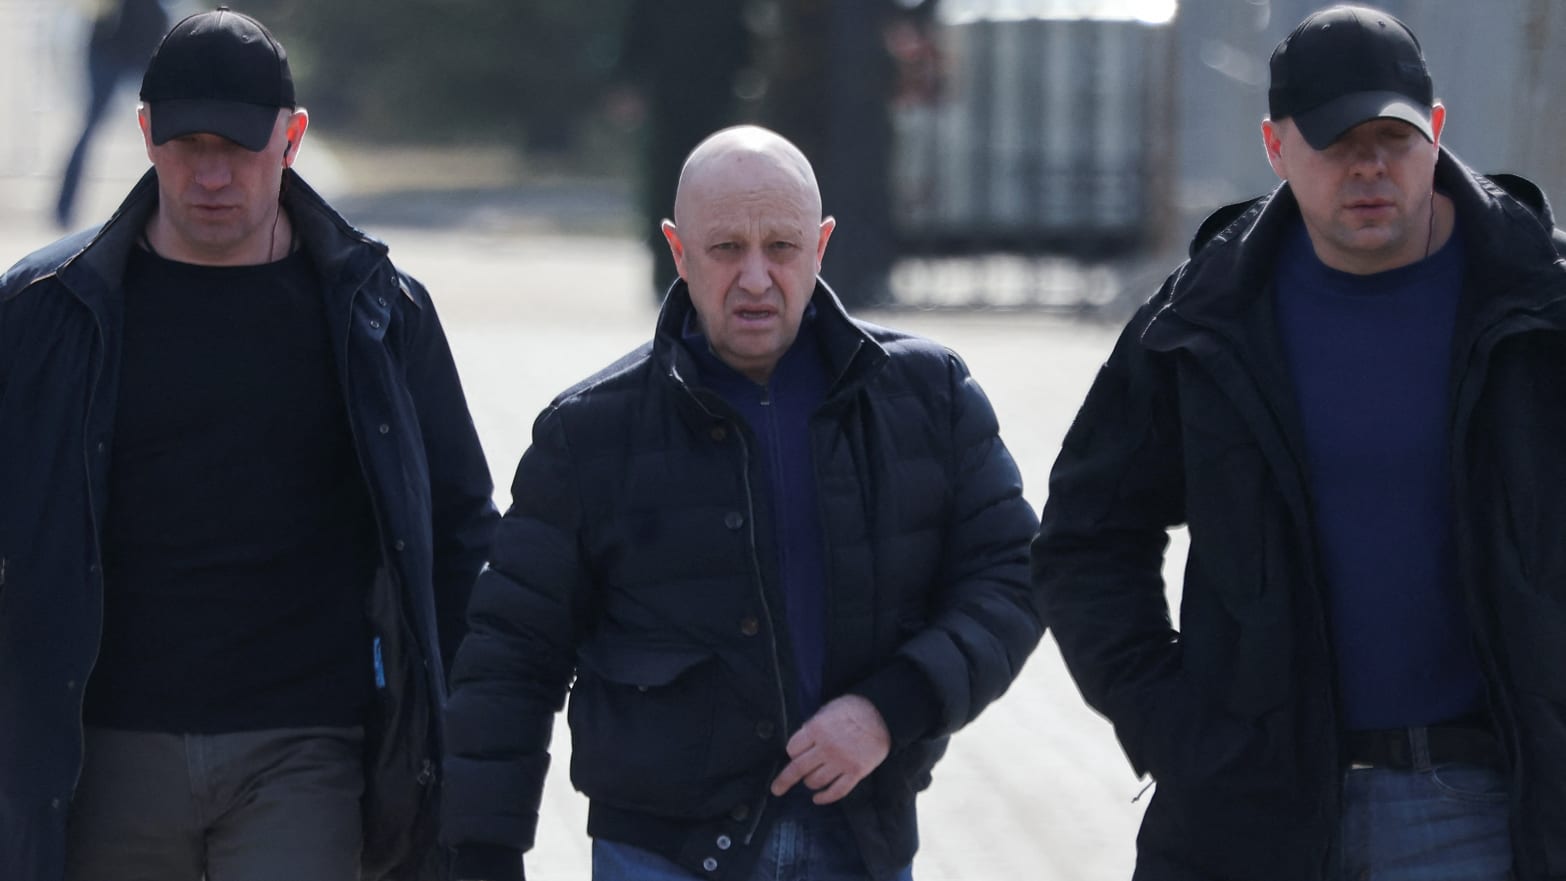 Wagners Yevgeny Prigozhin Offered to Reveal Russian Positions to Ukraine, Report Says photo picture